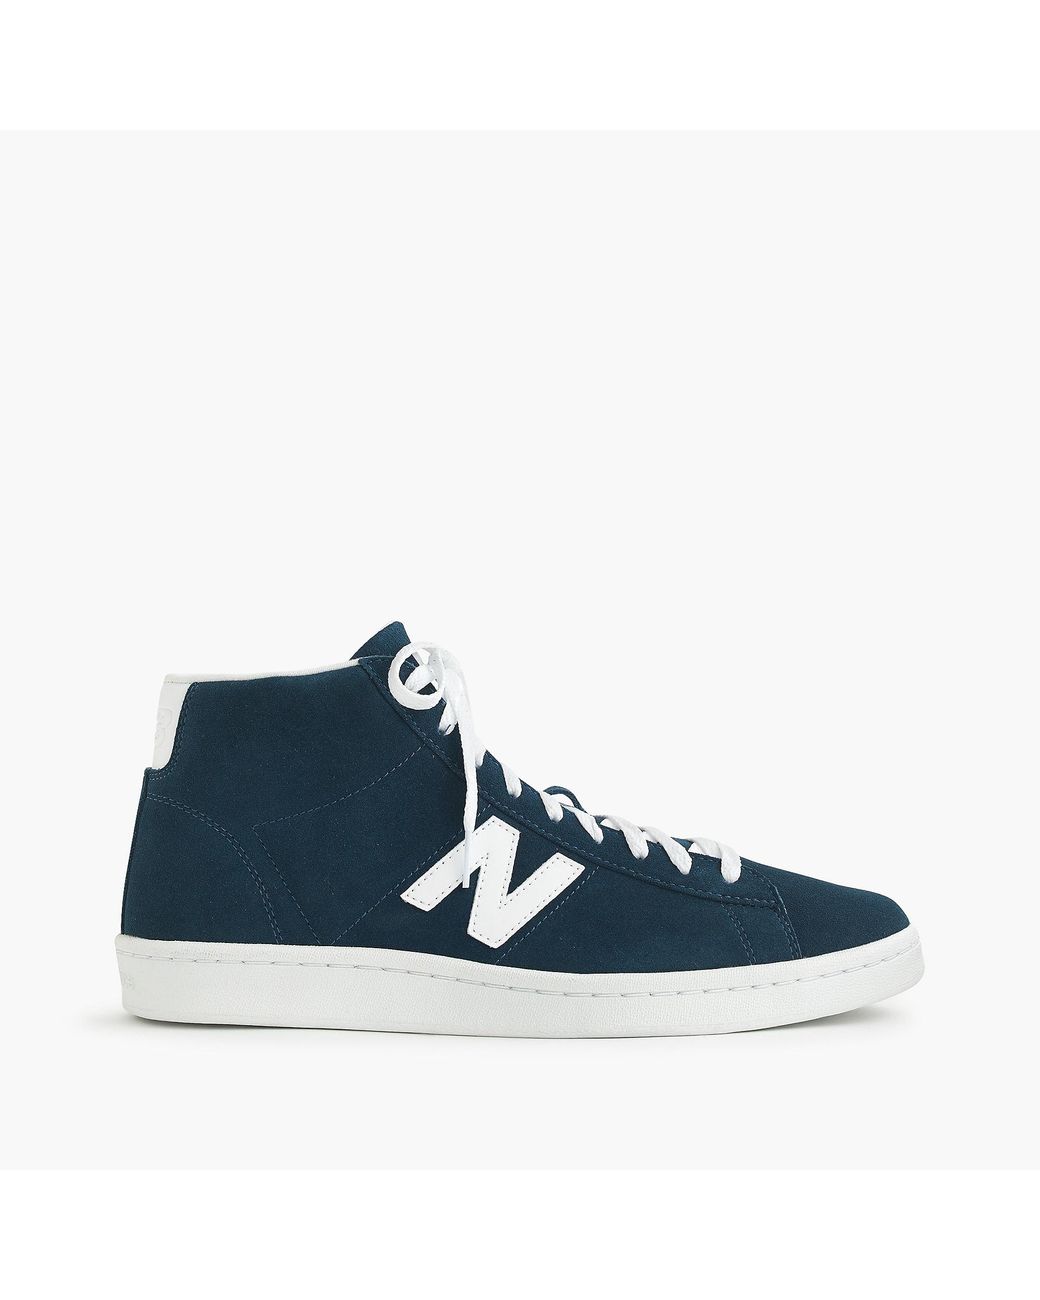 ANTES DE CRISTO. Hassy Desde allí New Balance 891 High-top Sneakers in Blue for Men | Lyst